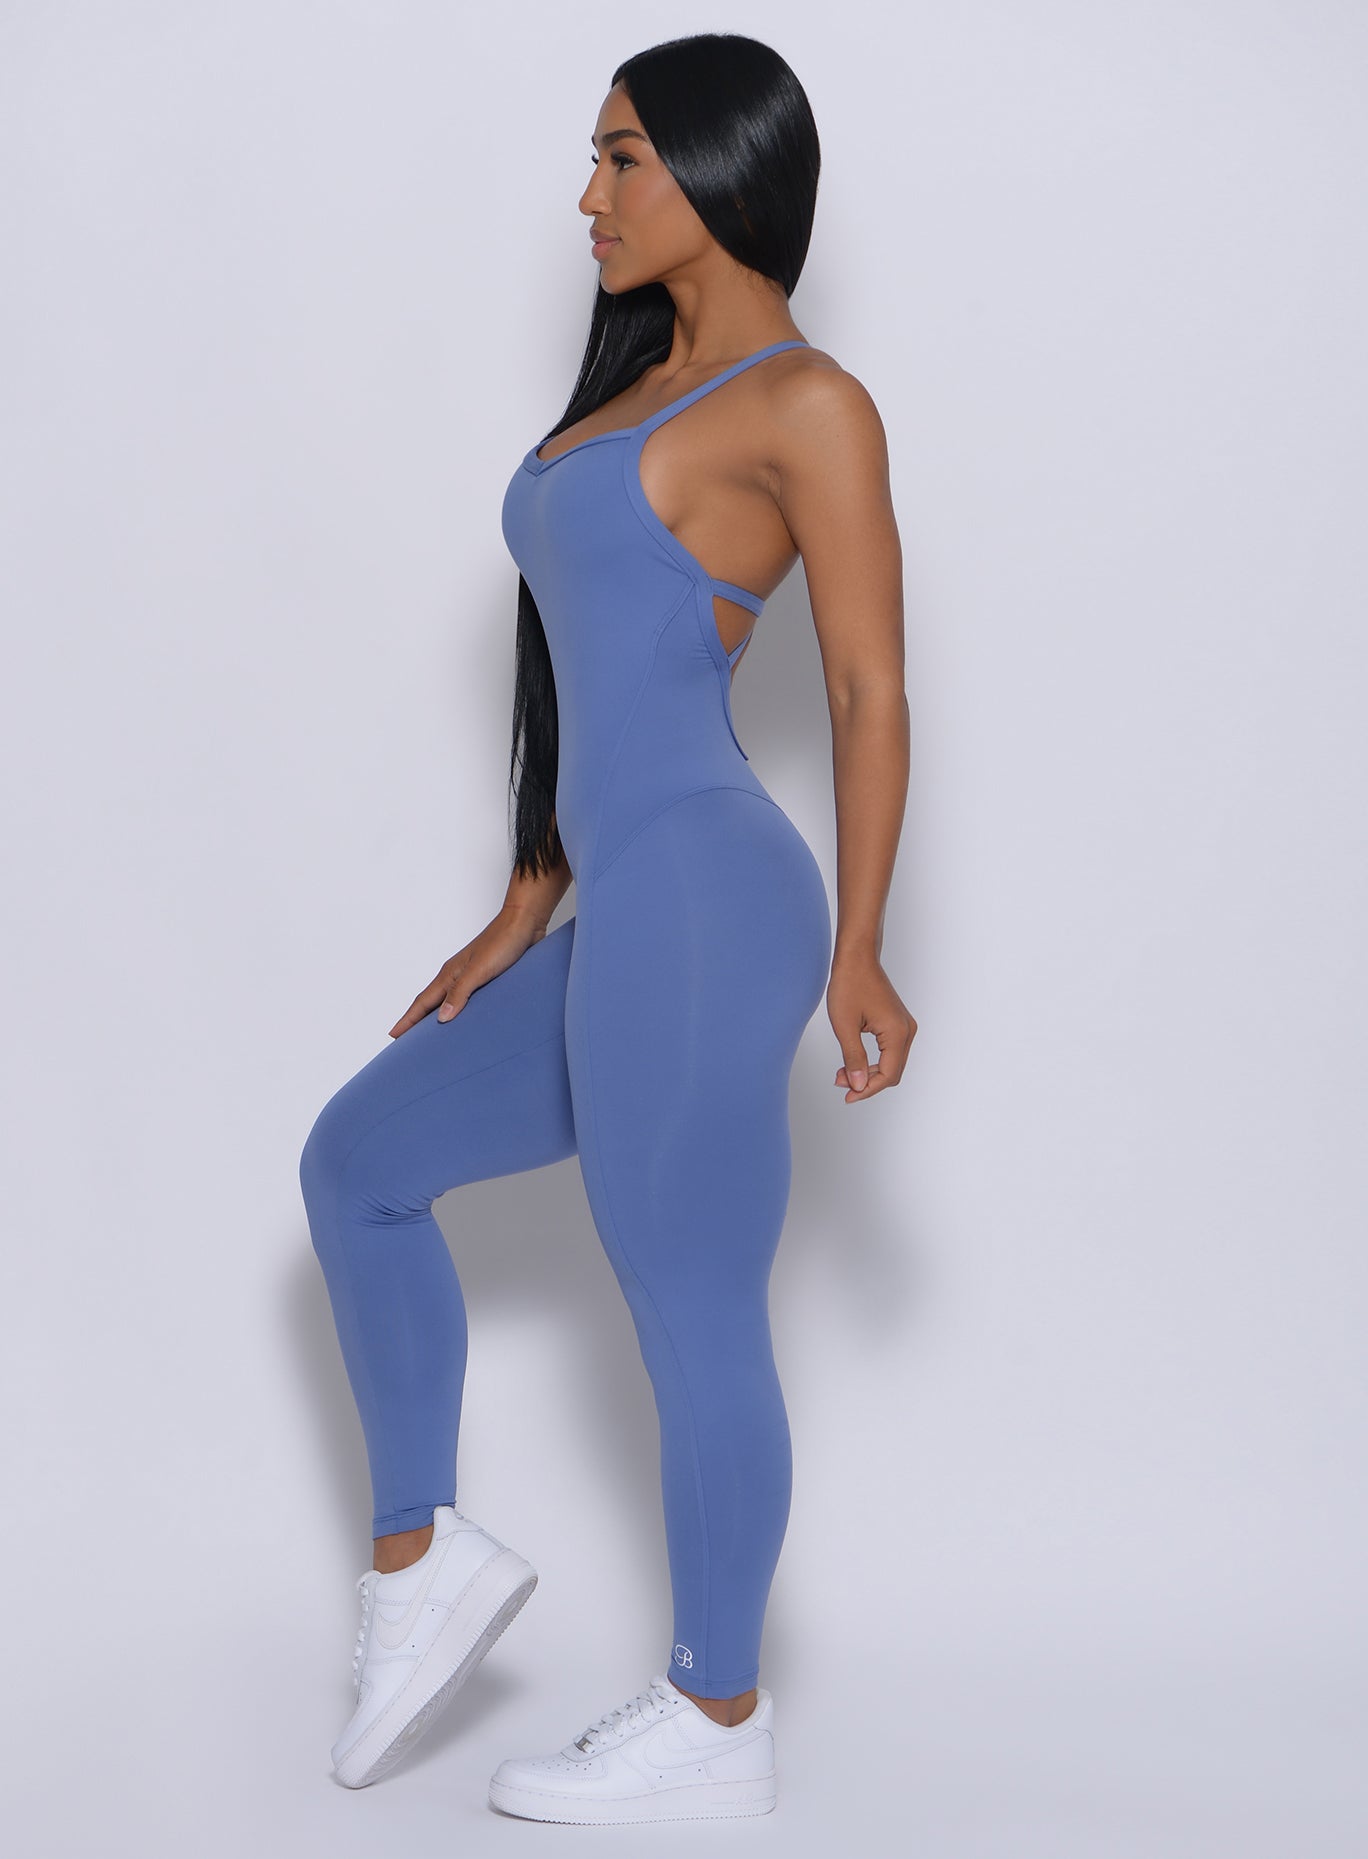 Left side profile view of the model with her right hand on thigh wearing our sculpted bodysuit in denim blue color 